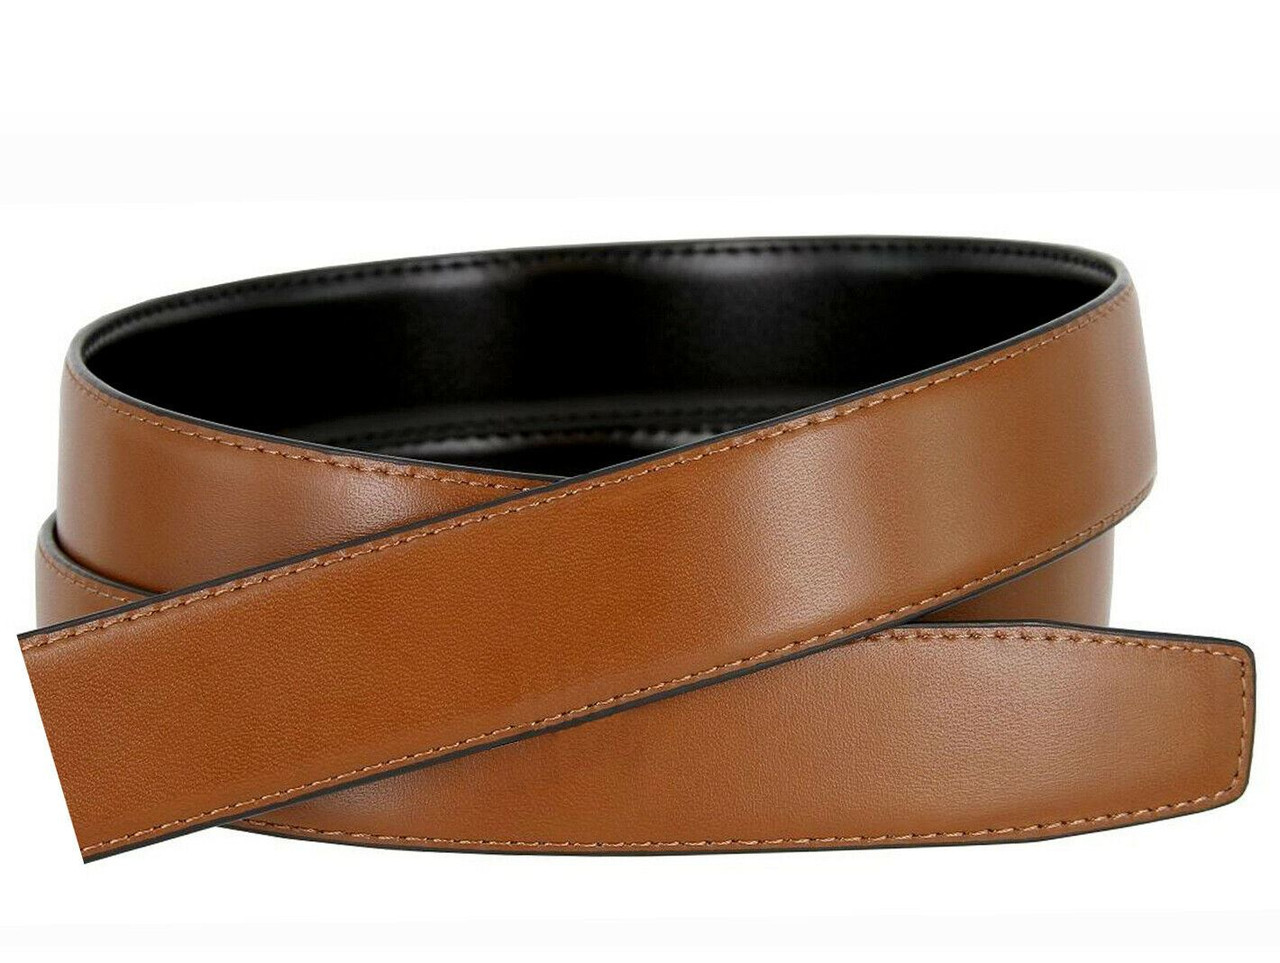 Vatee's Men's Genuine Leather Reversible Blets Without Buckle